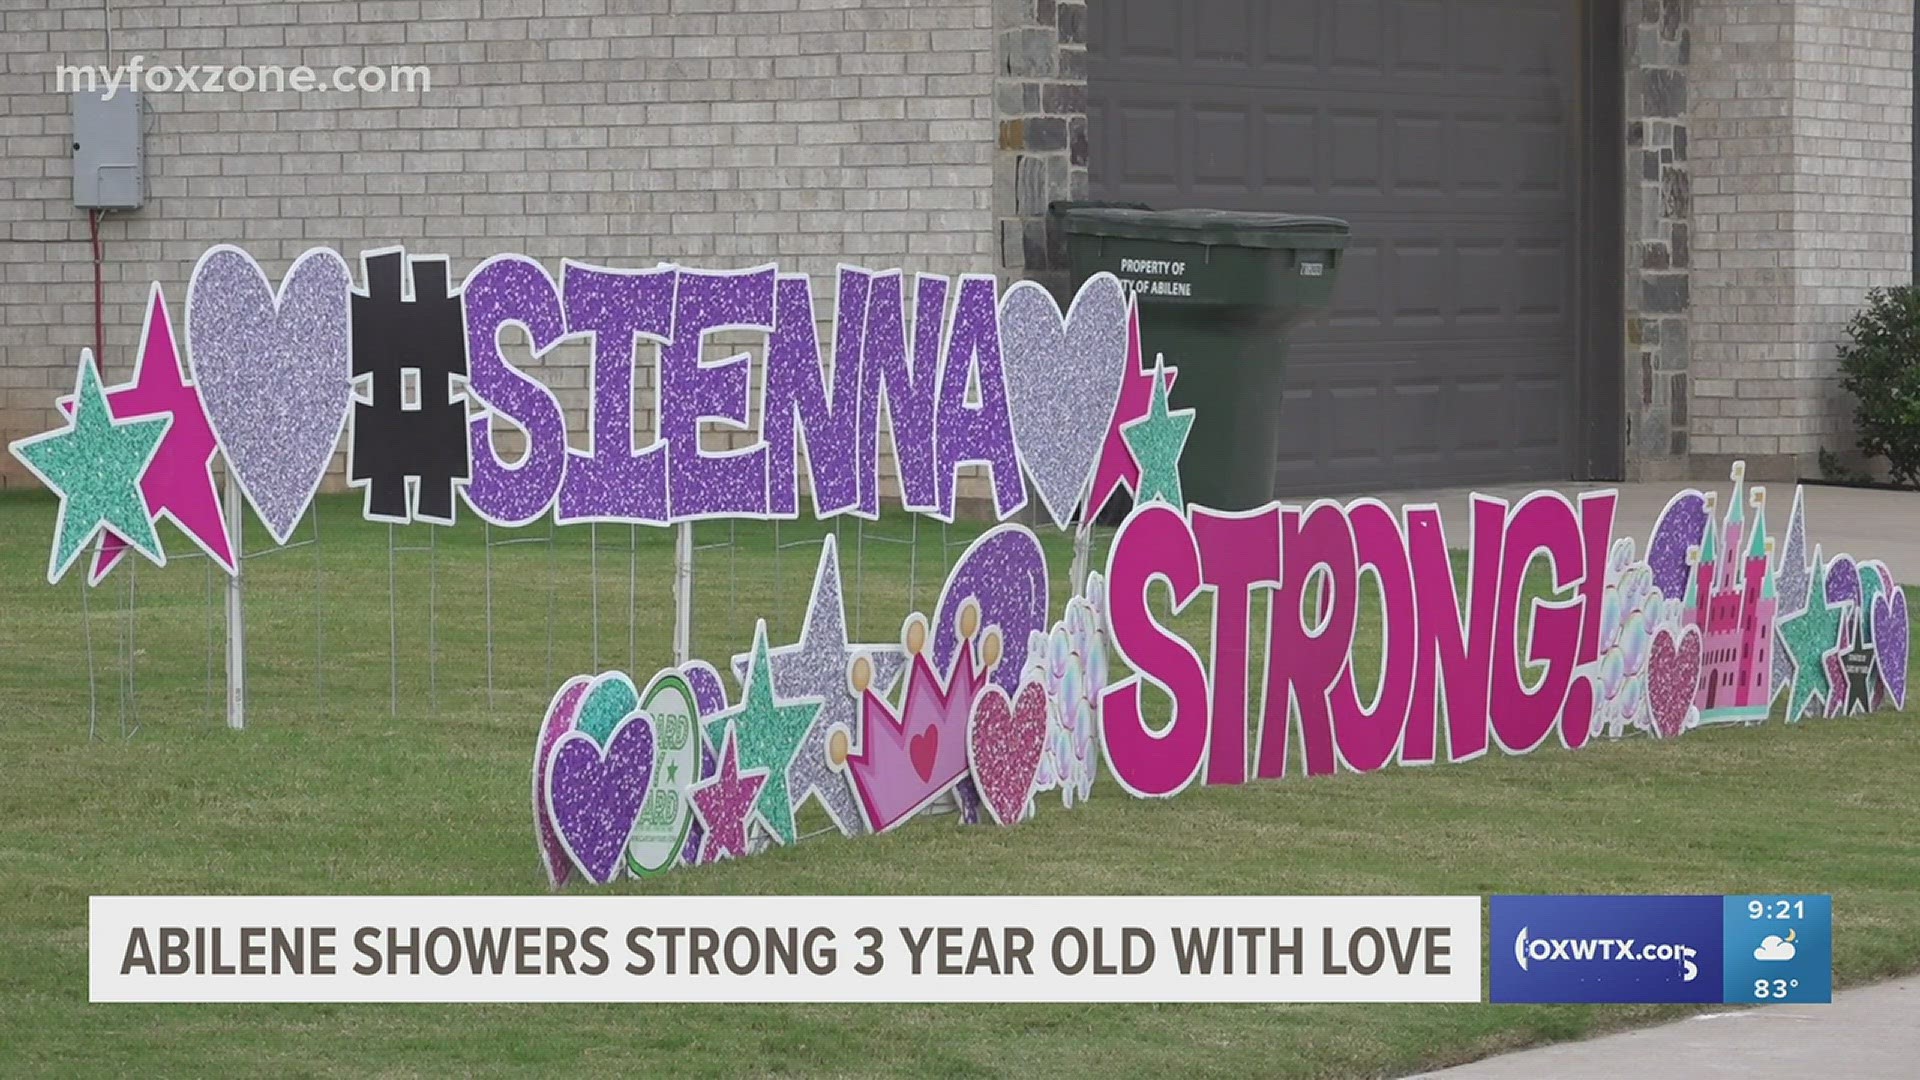 People of Abilene gathered Tuesday evening to have a neighborhood parade for 3-year-old Sienna.